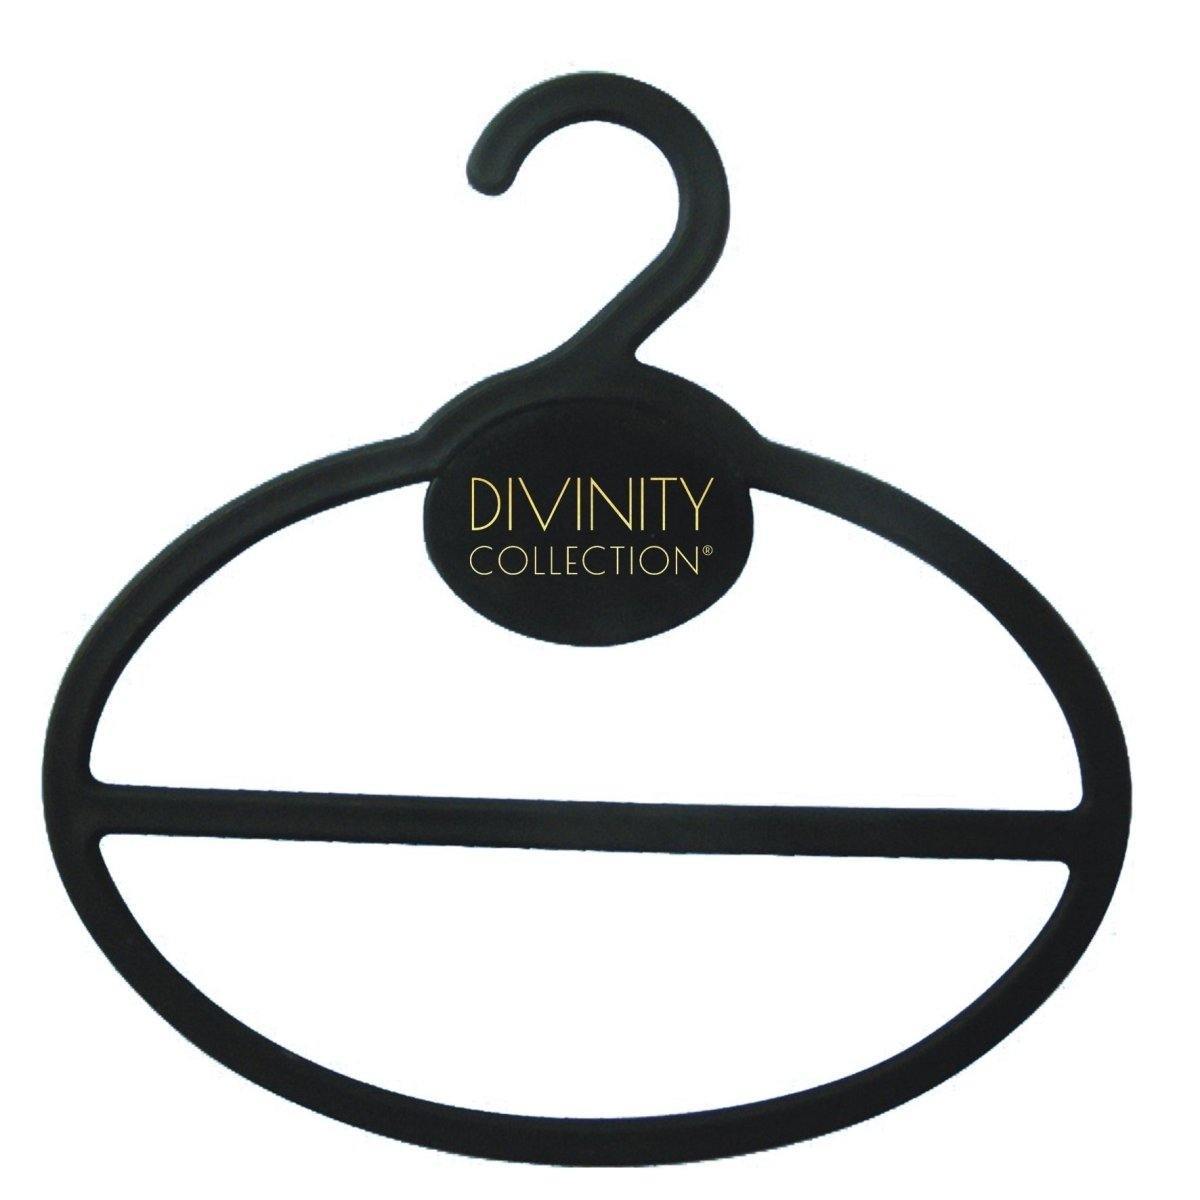 Scarf (Hijab) Hanger | Divinity Collection